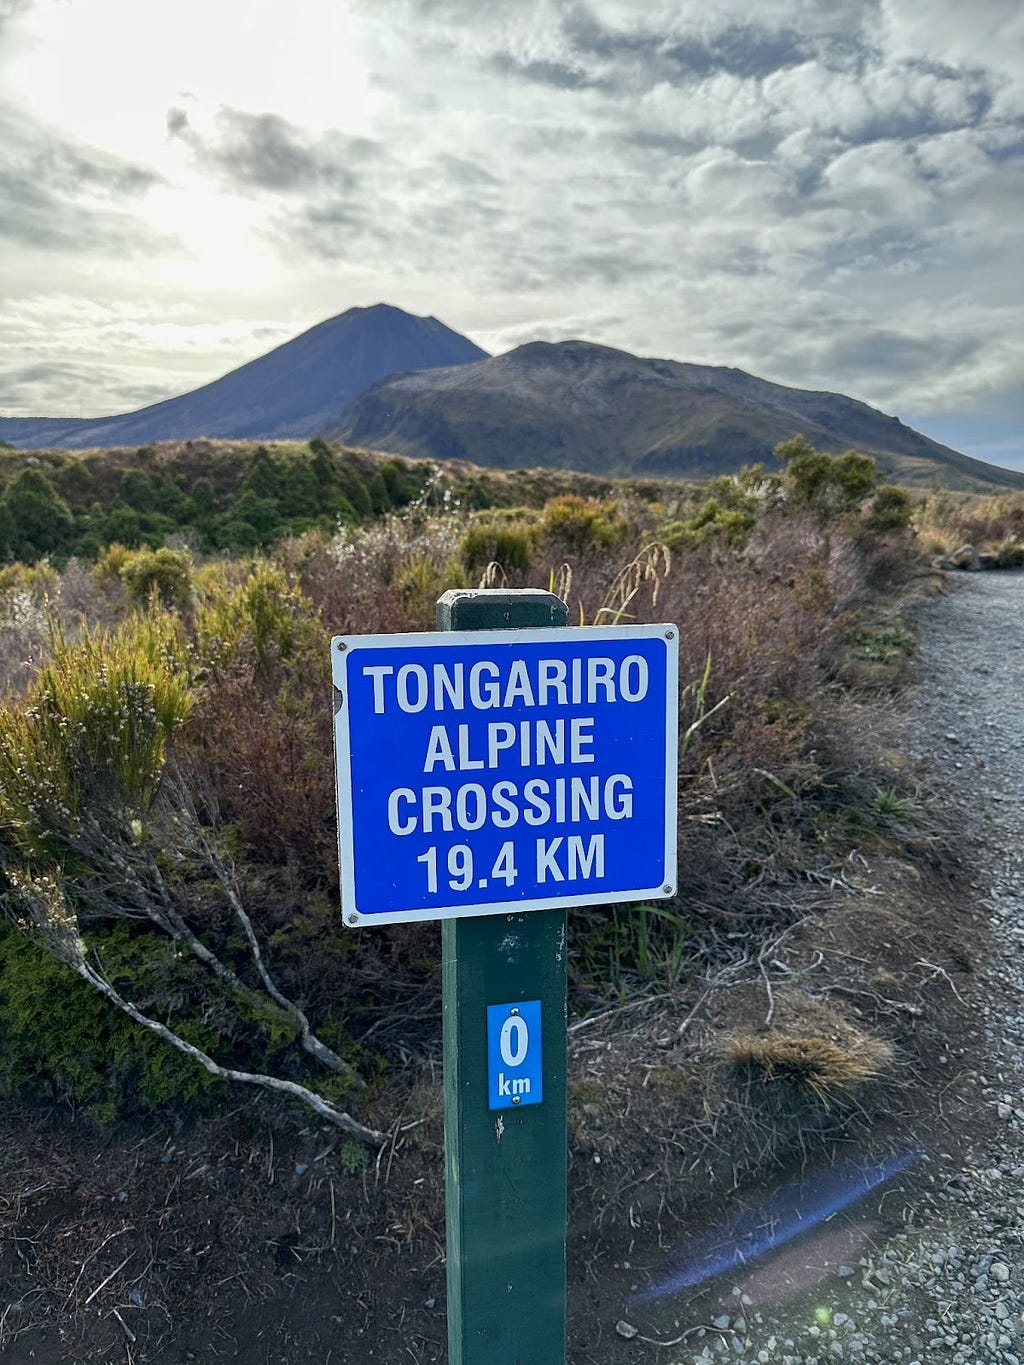 Volcano in distance. Trail leading to it with sign reading “Tongariro Alpine Crossing 19.4 km.”